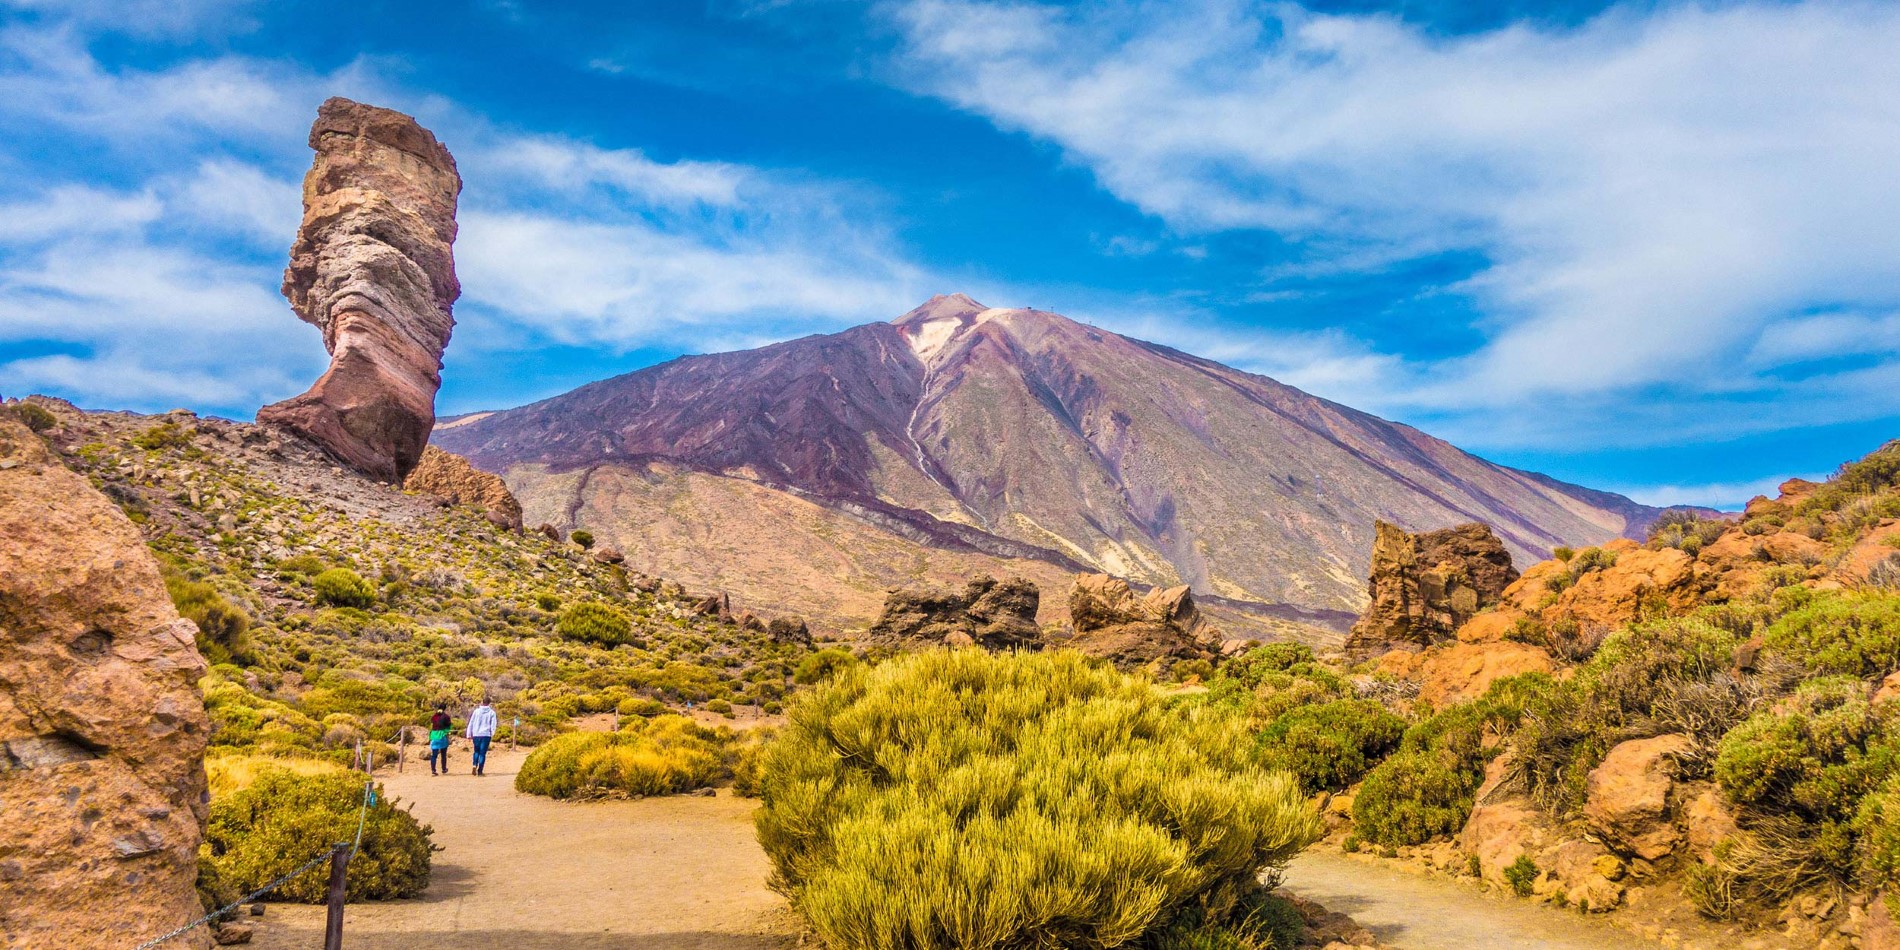 A canyon with Teide in the background